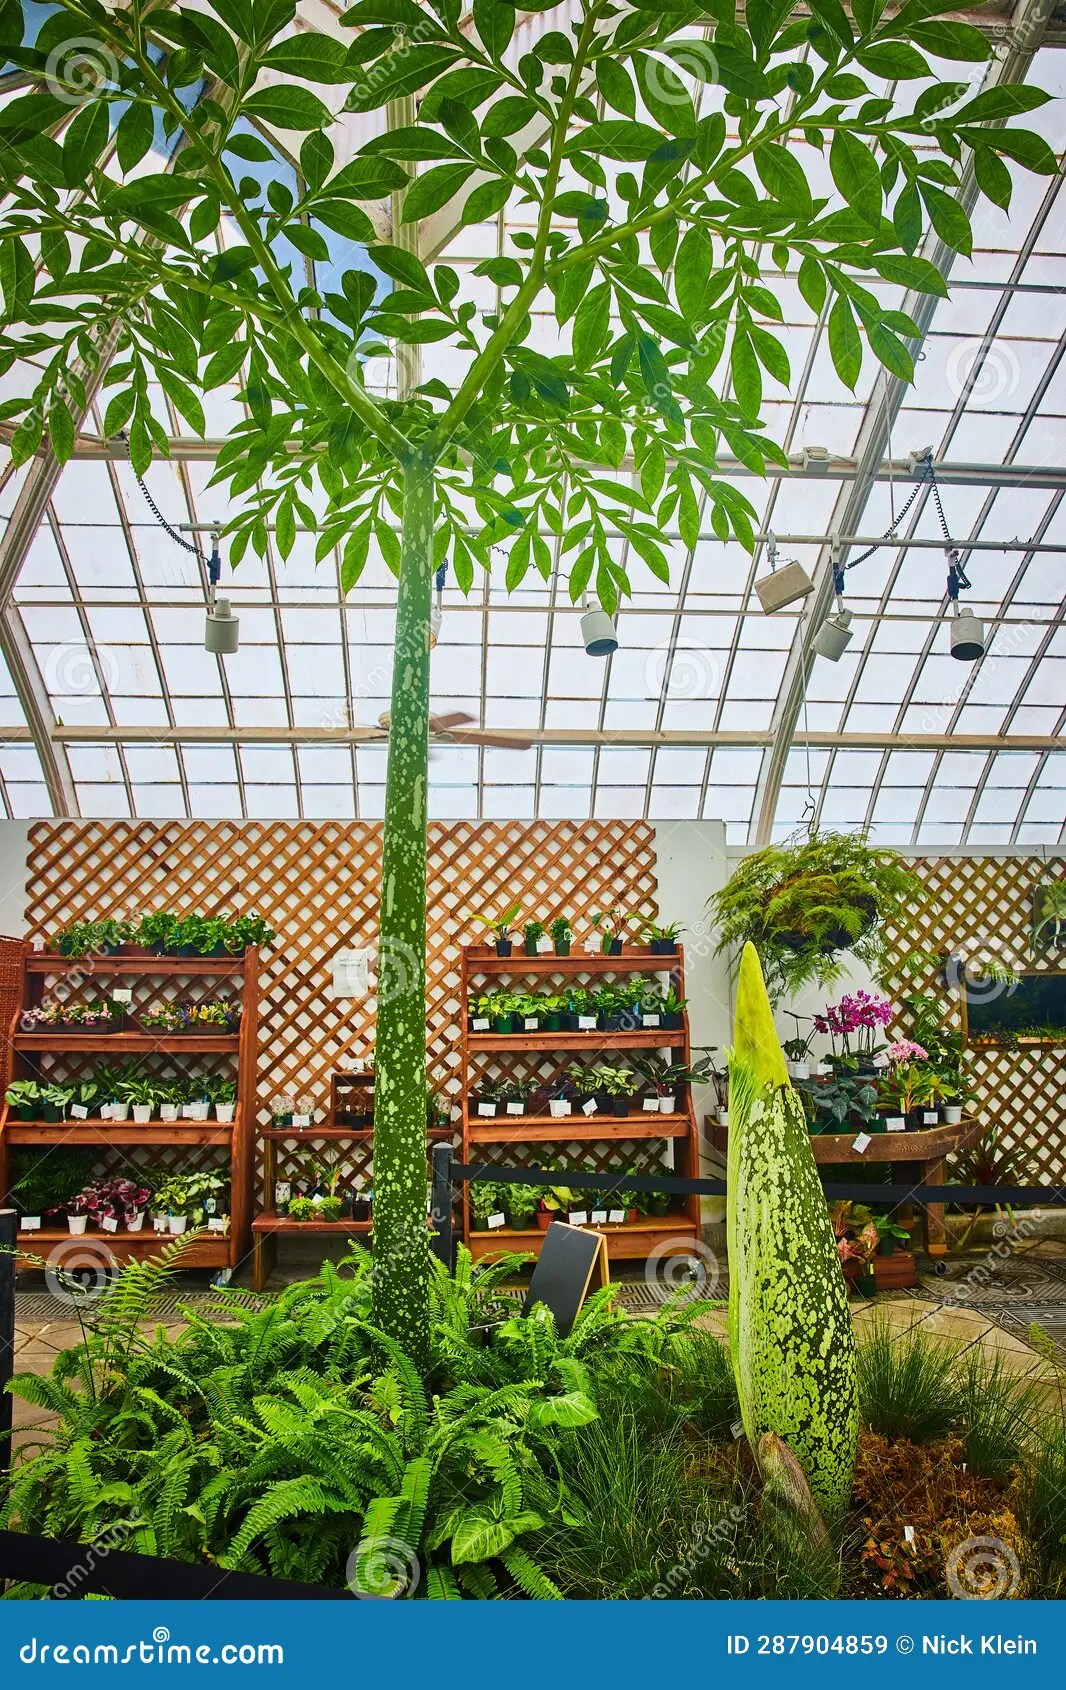 Tall Corpse Flower with Smaller Bud on Ground with Greenhouse and